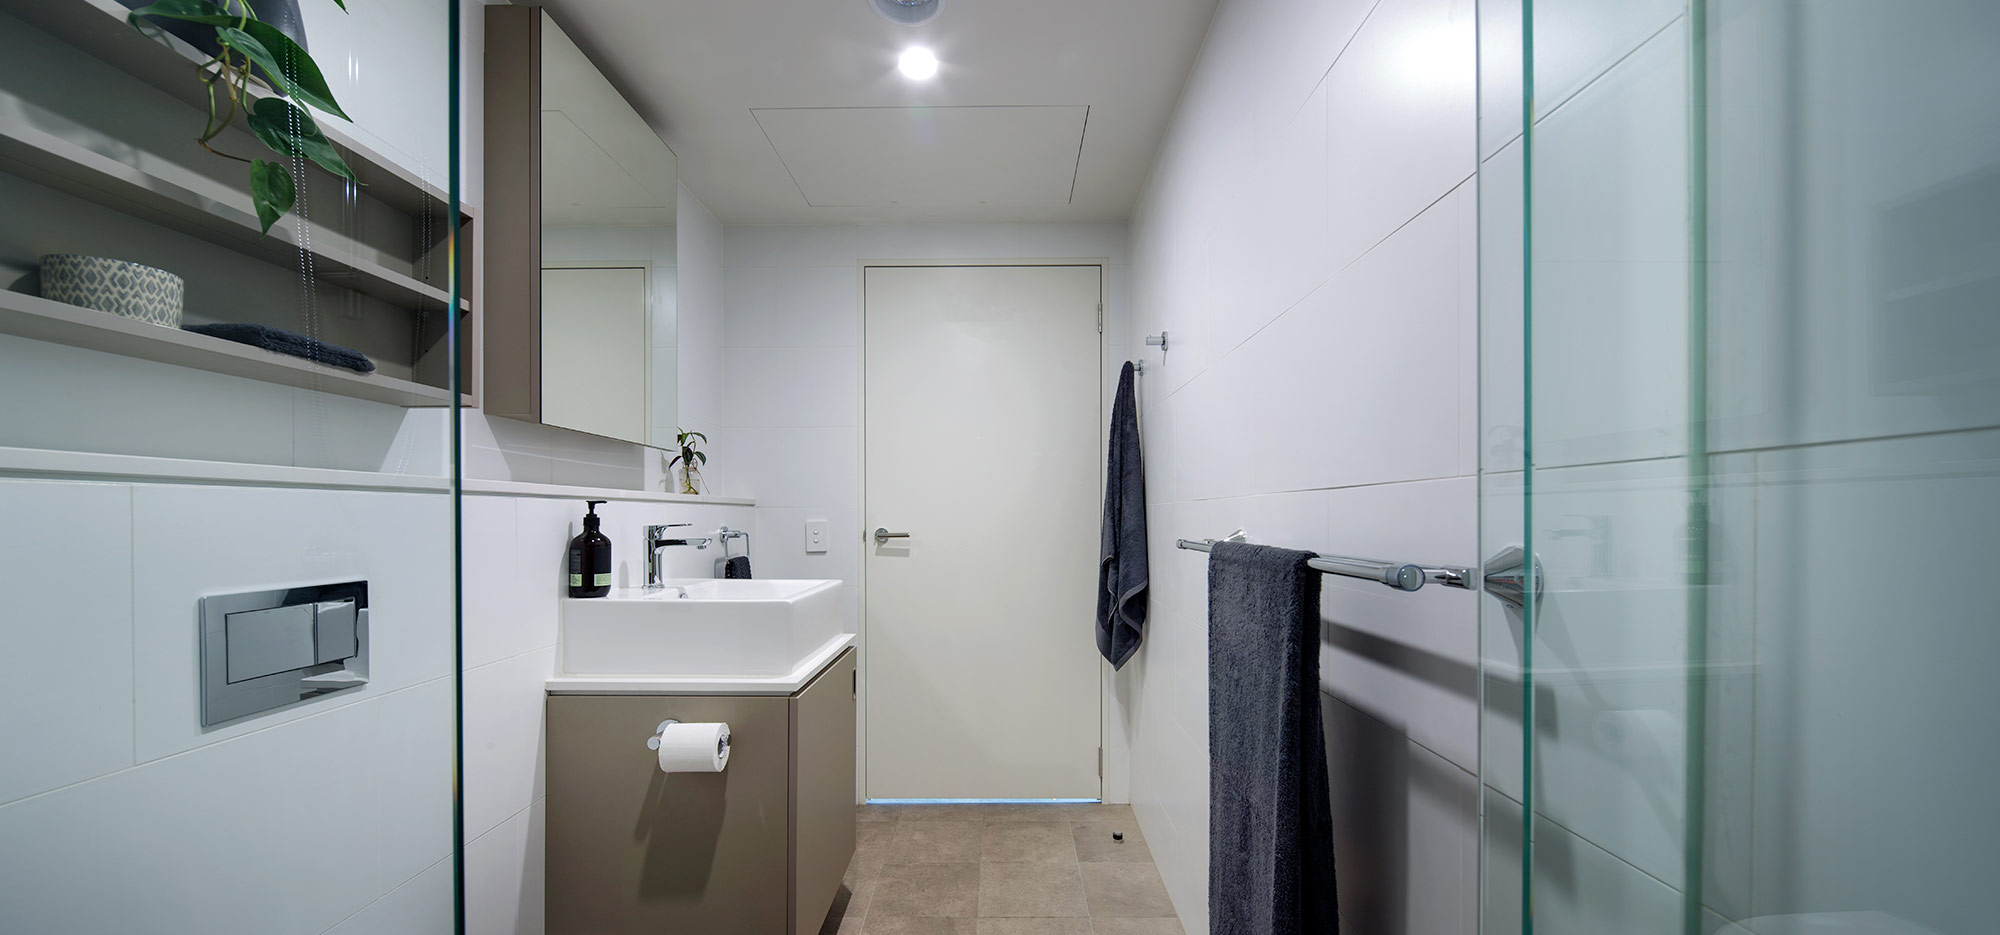 interior fitout of modular bathroom manufactured by schiavello in melbourne